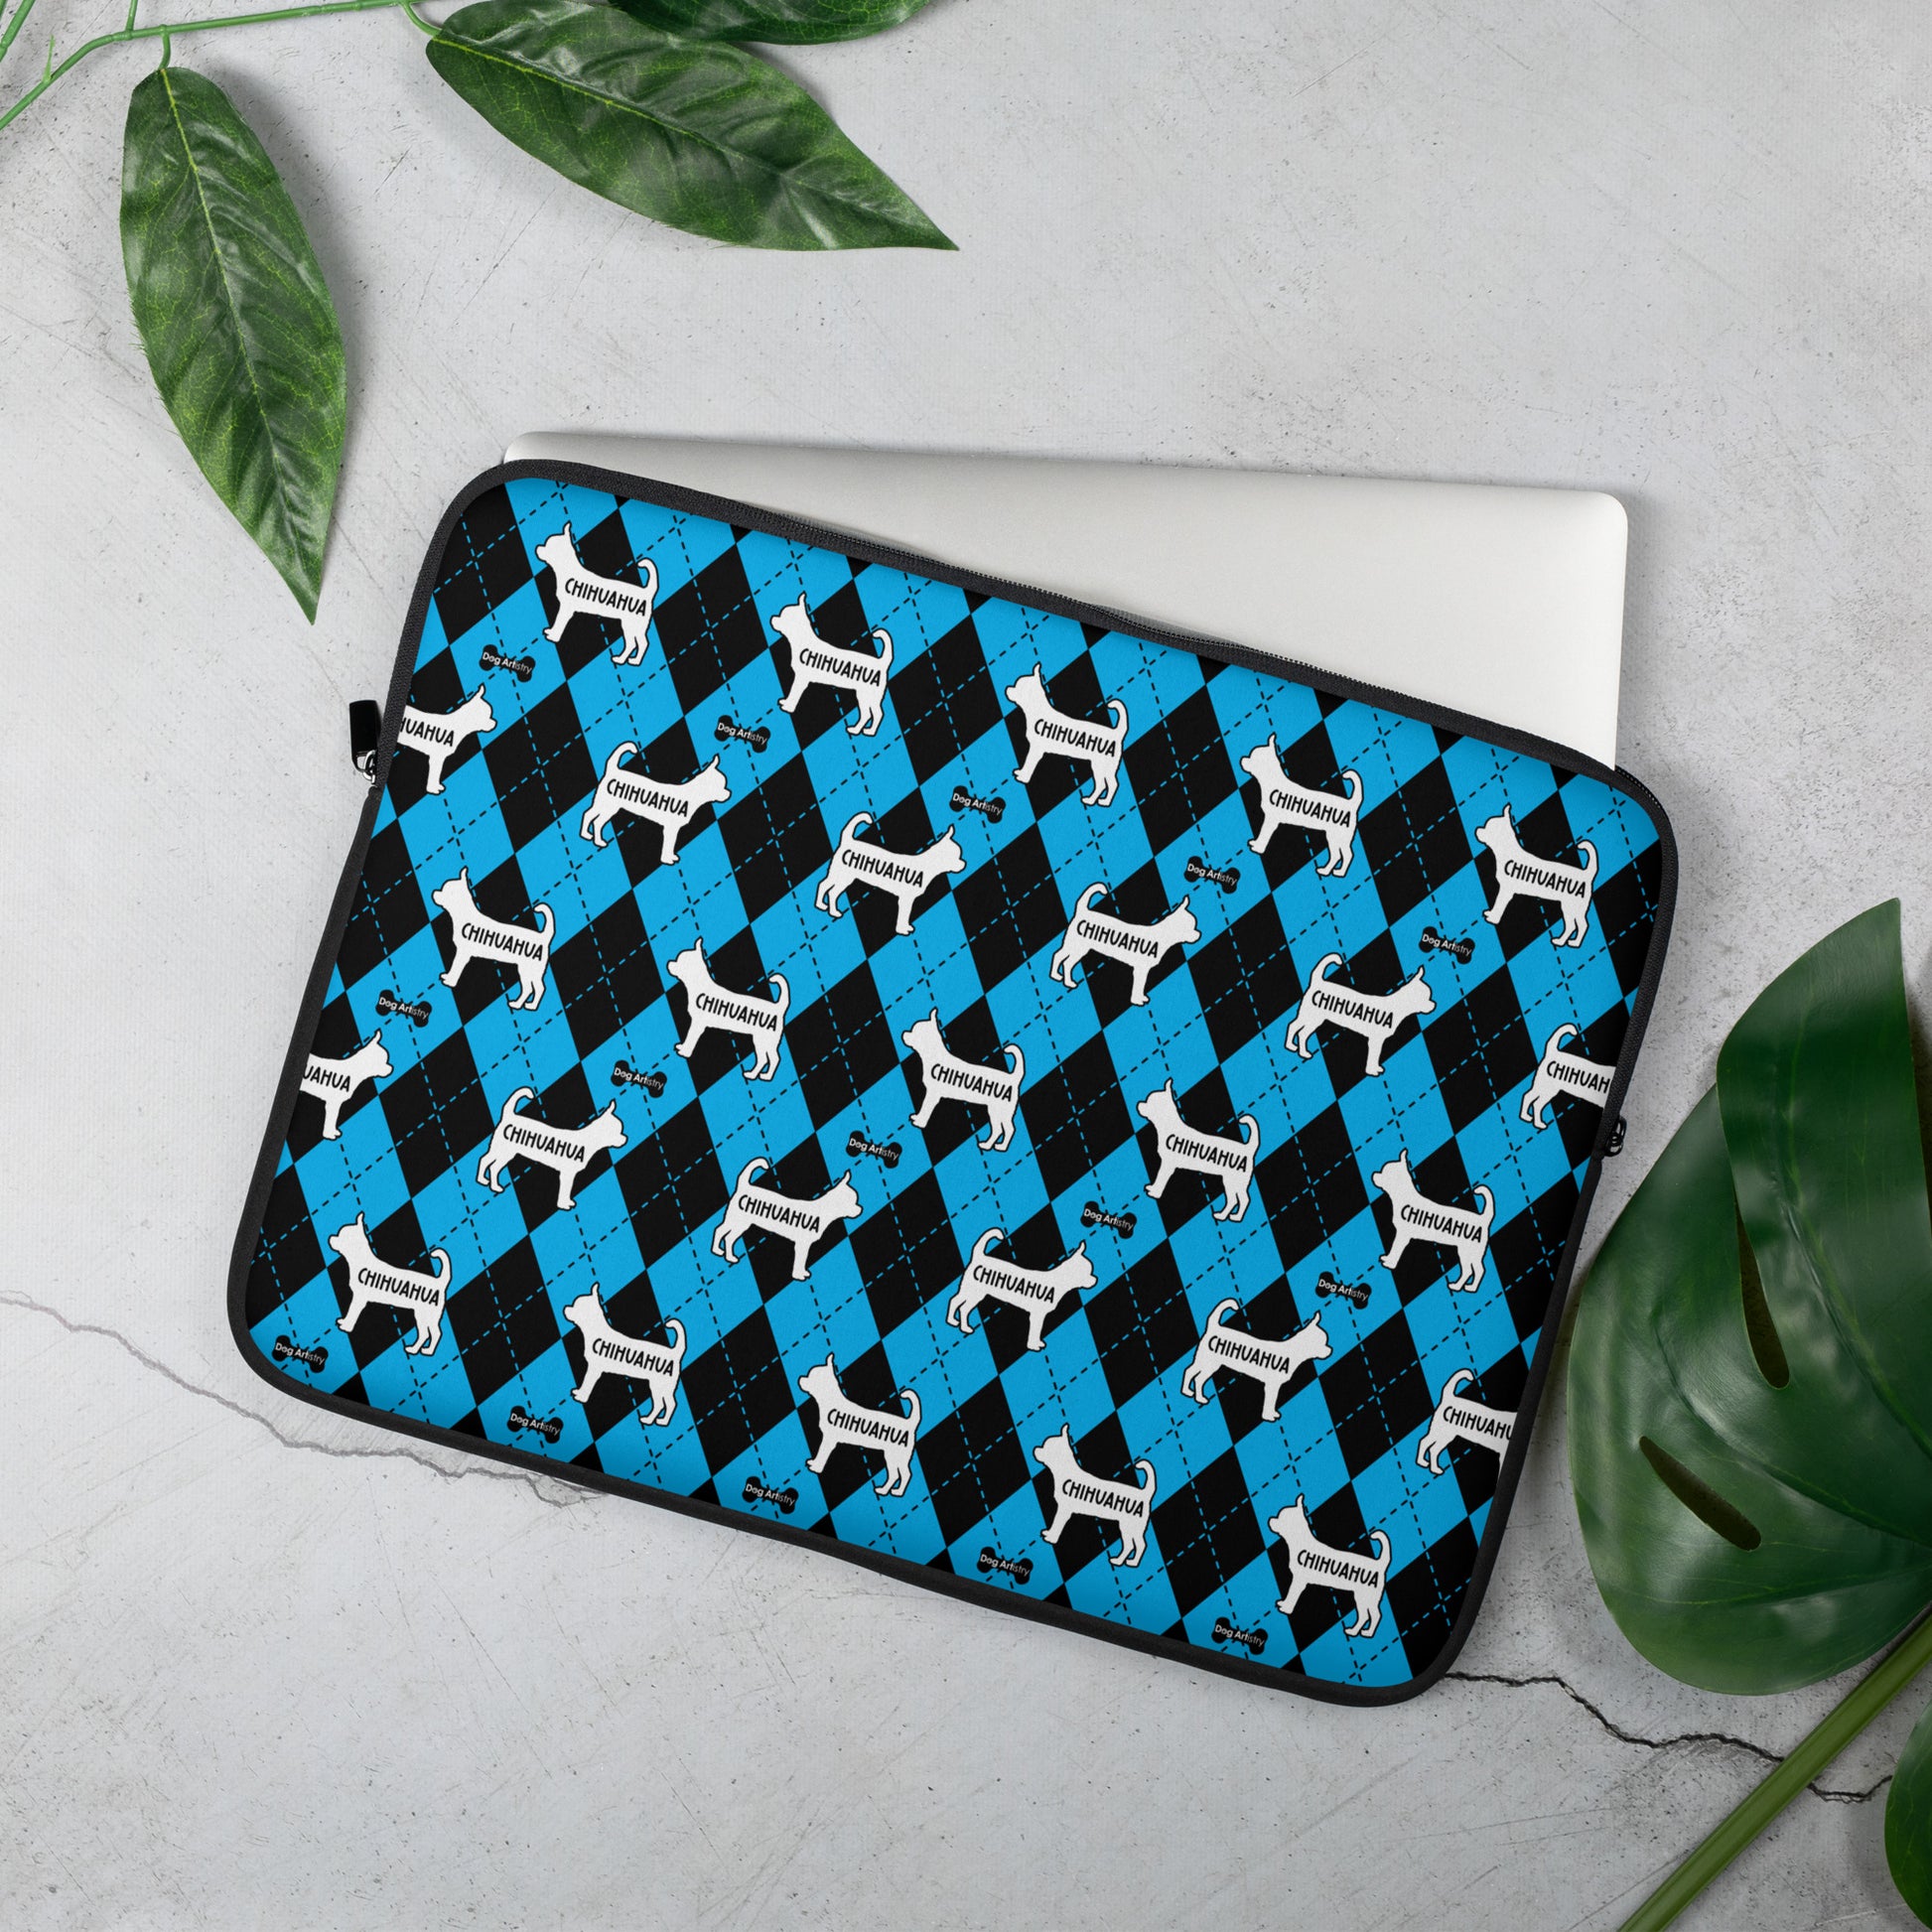 Chihuahua blue and black argyle laptop sleeve by Dog Artistry